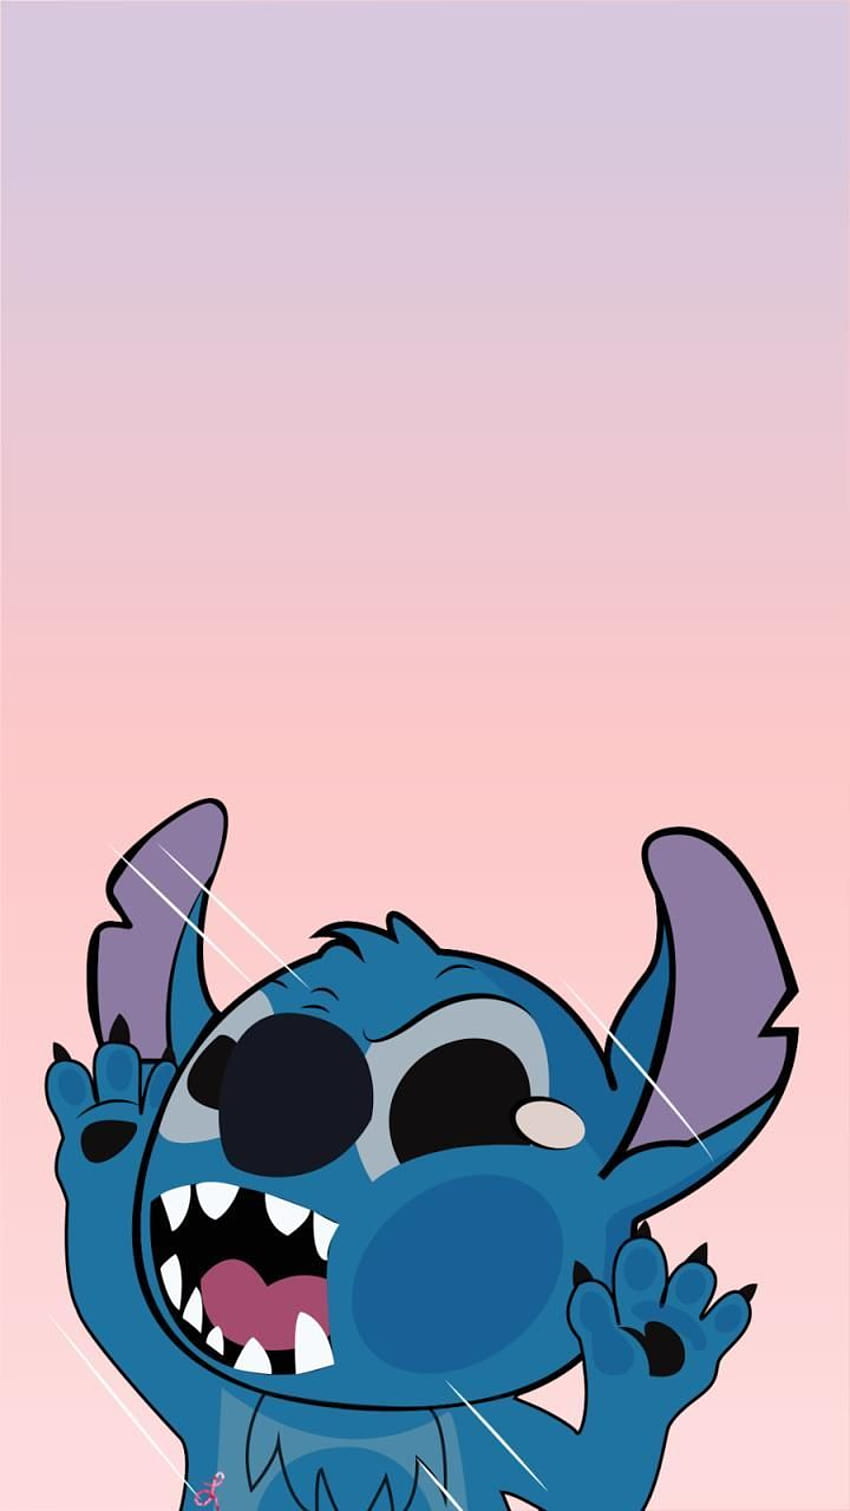 50 Adorable Stitch Wallpapers  Royal Stitch on Black Background  Idea  Wallpapers  iPhone WallpapersColor Schemes